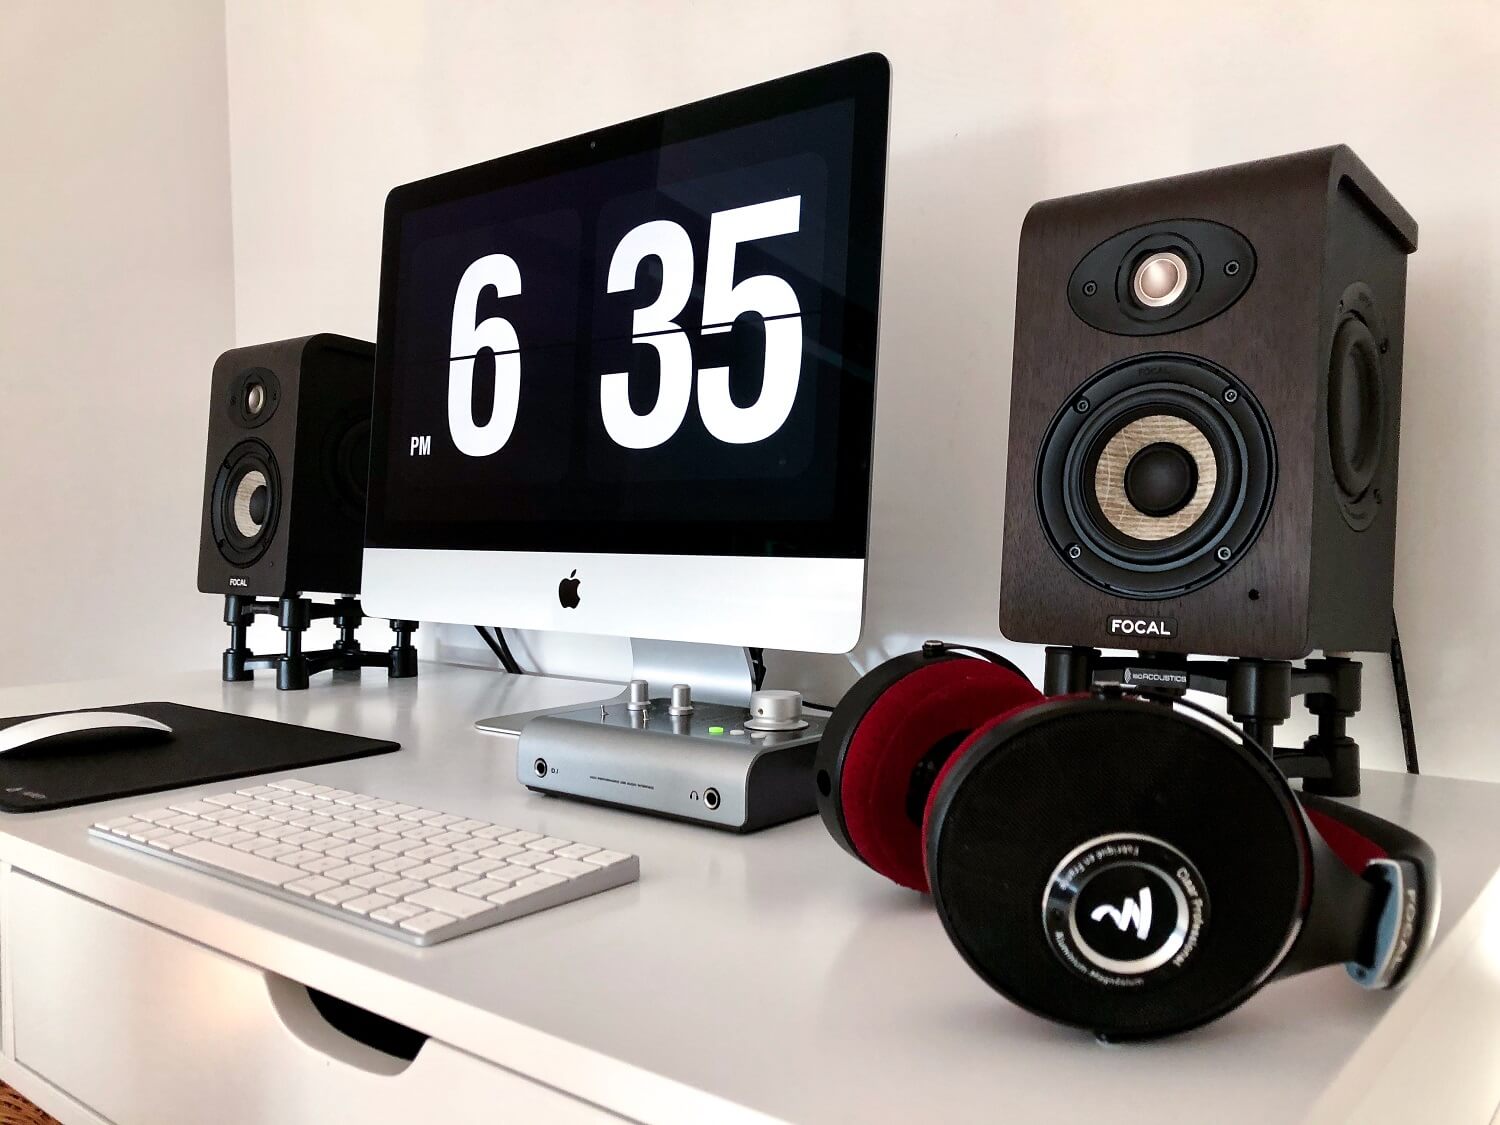 Home mixing setup including iMac, interface, speakers and headphones